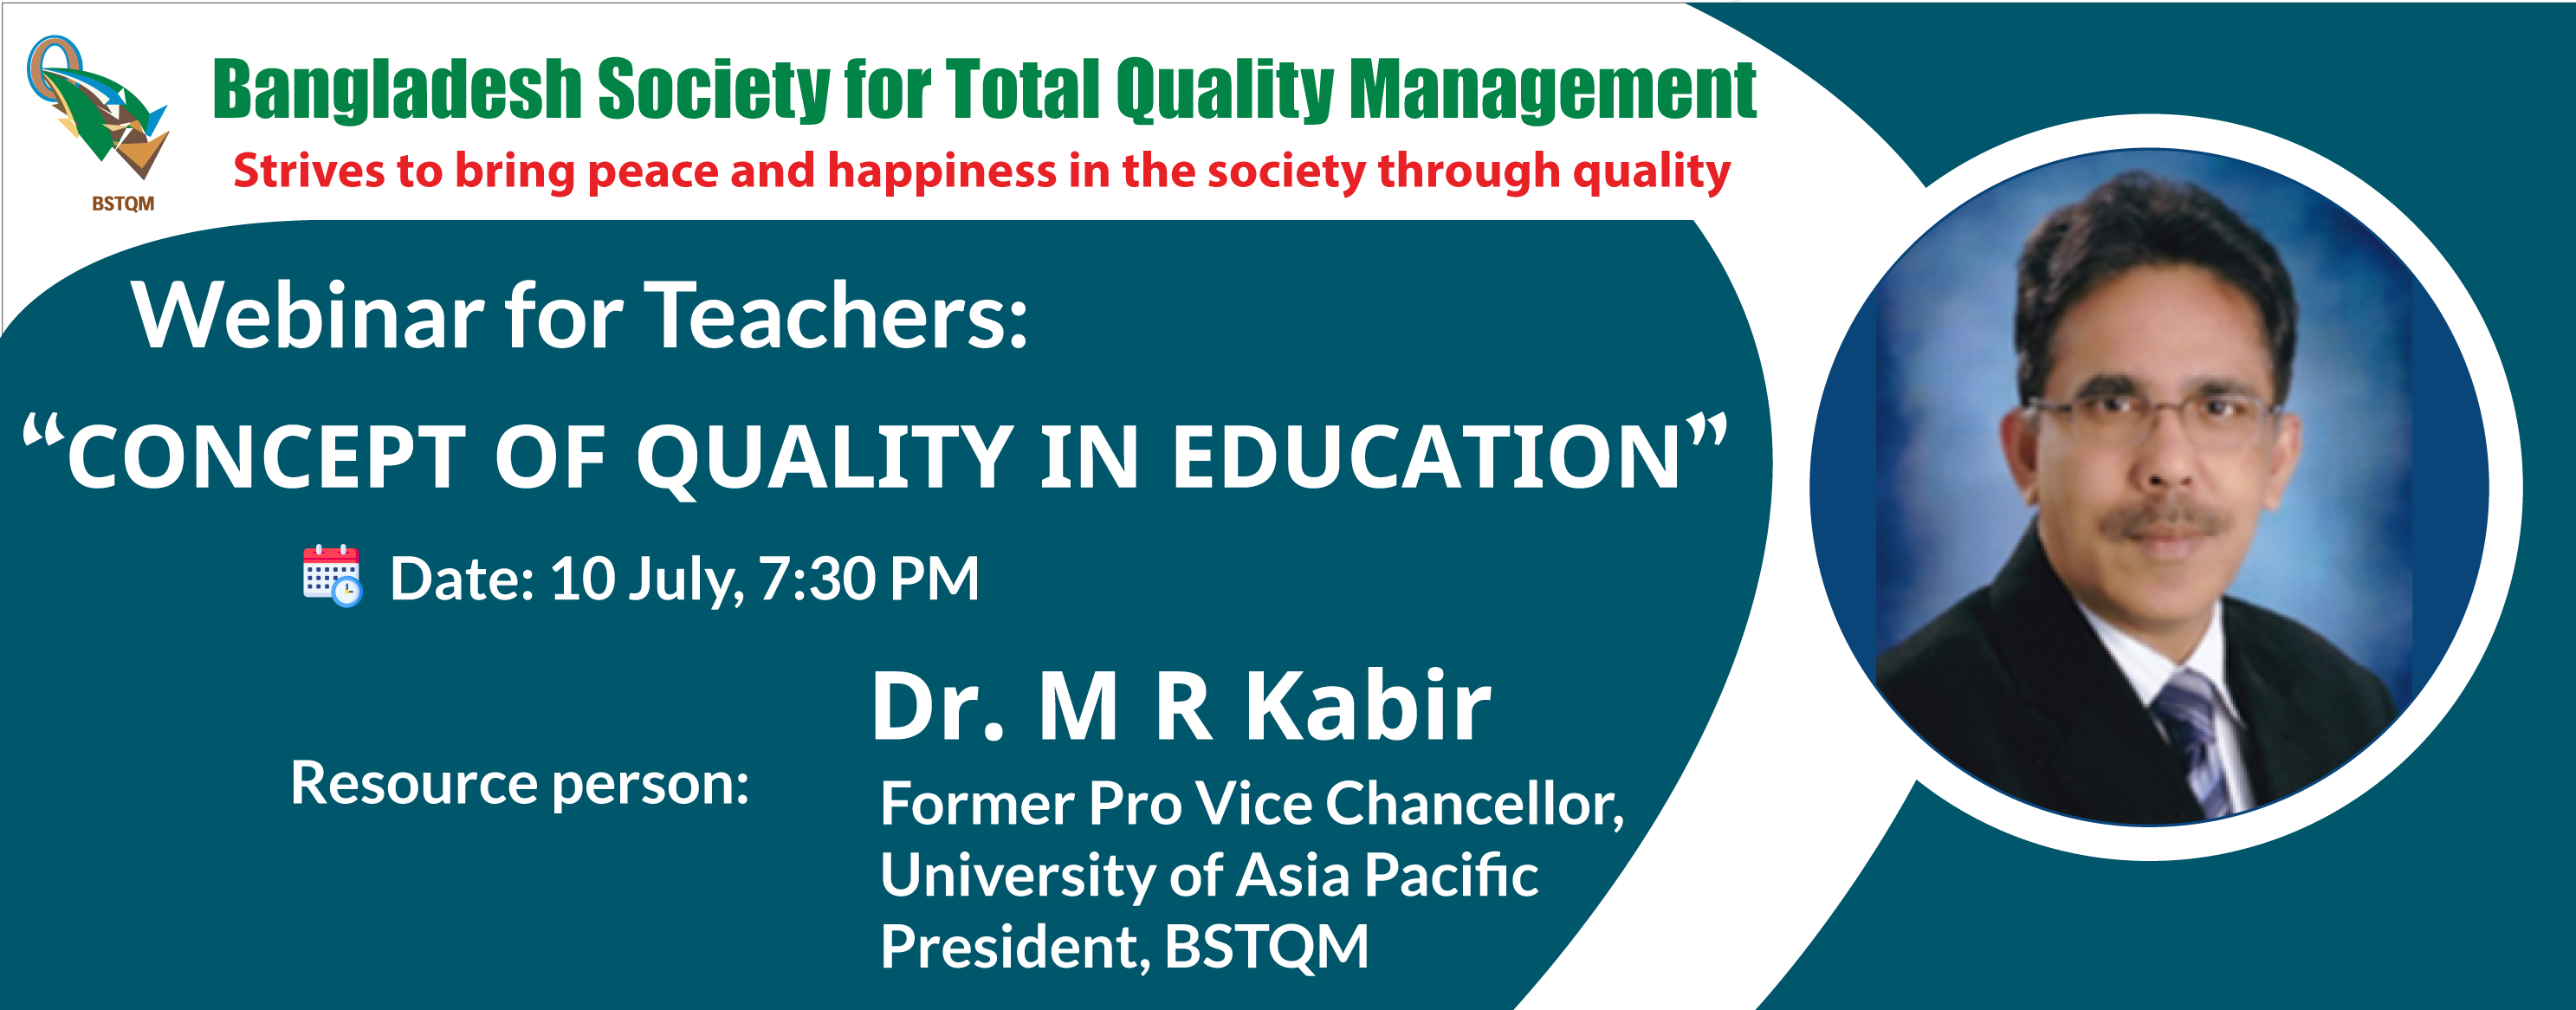 Webinar for Teachers “Concept of Quality in Education”